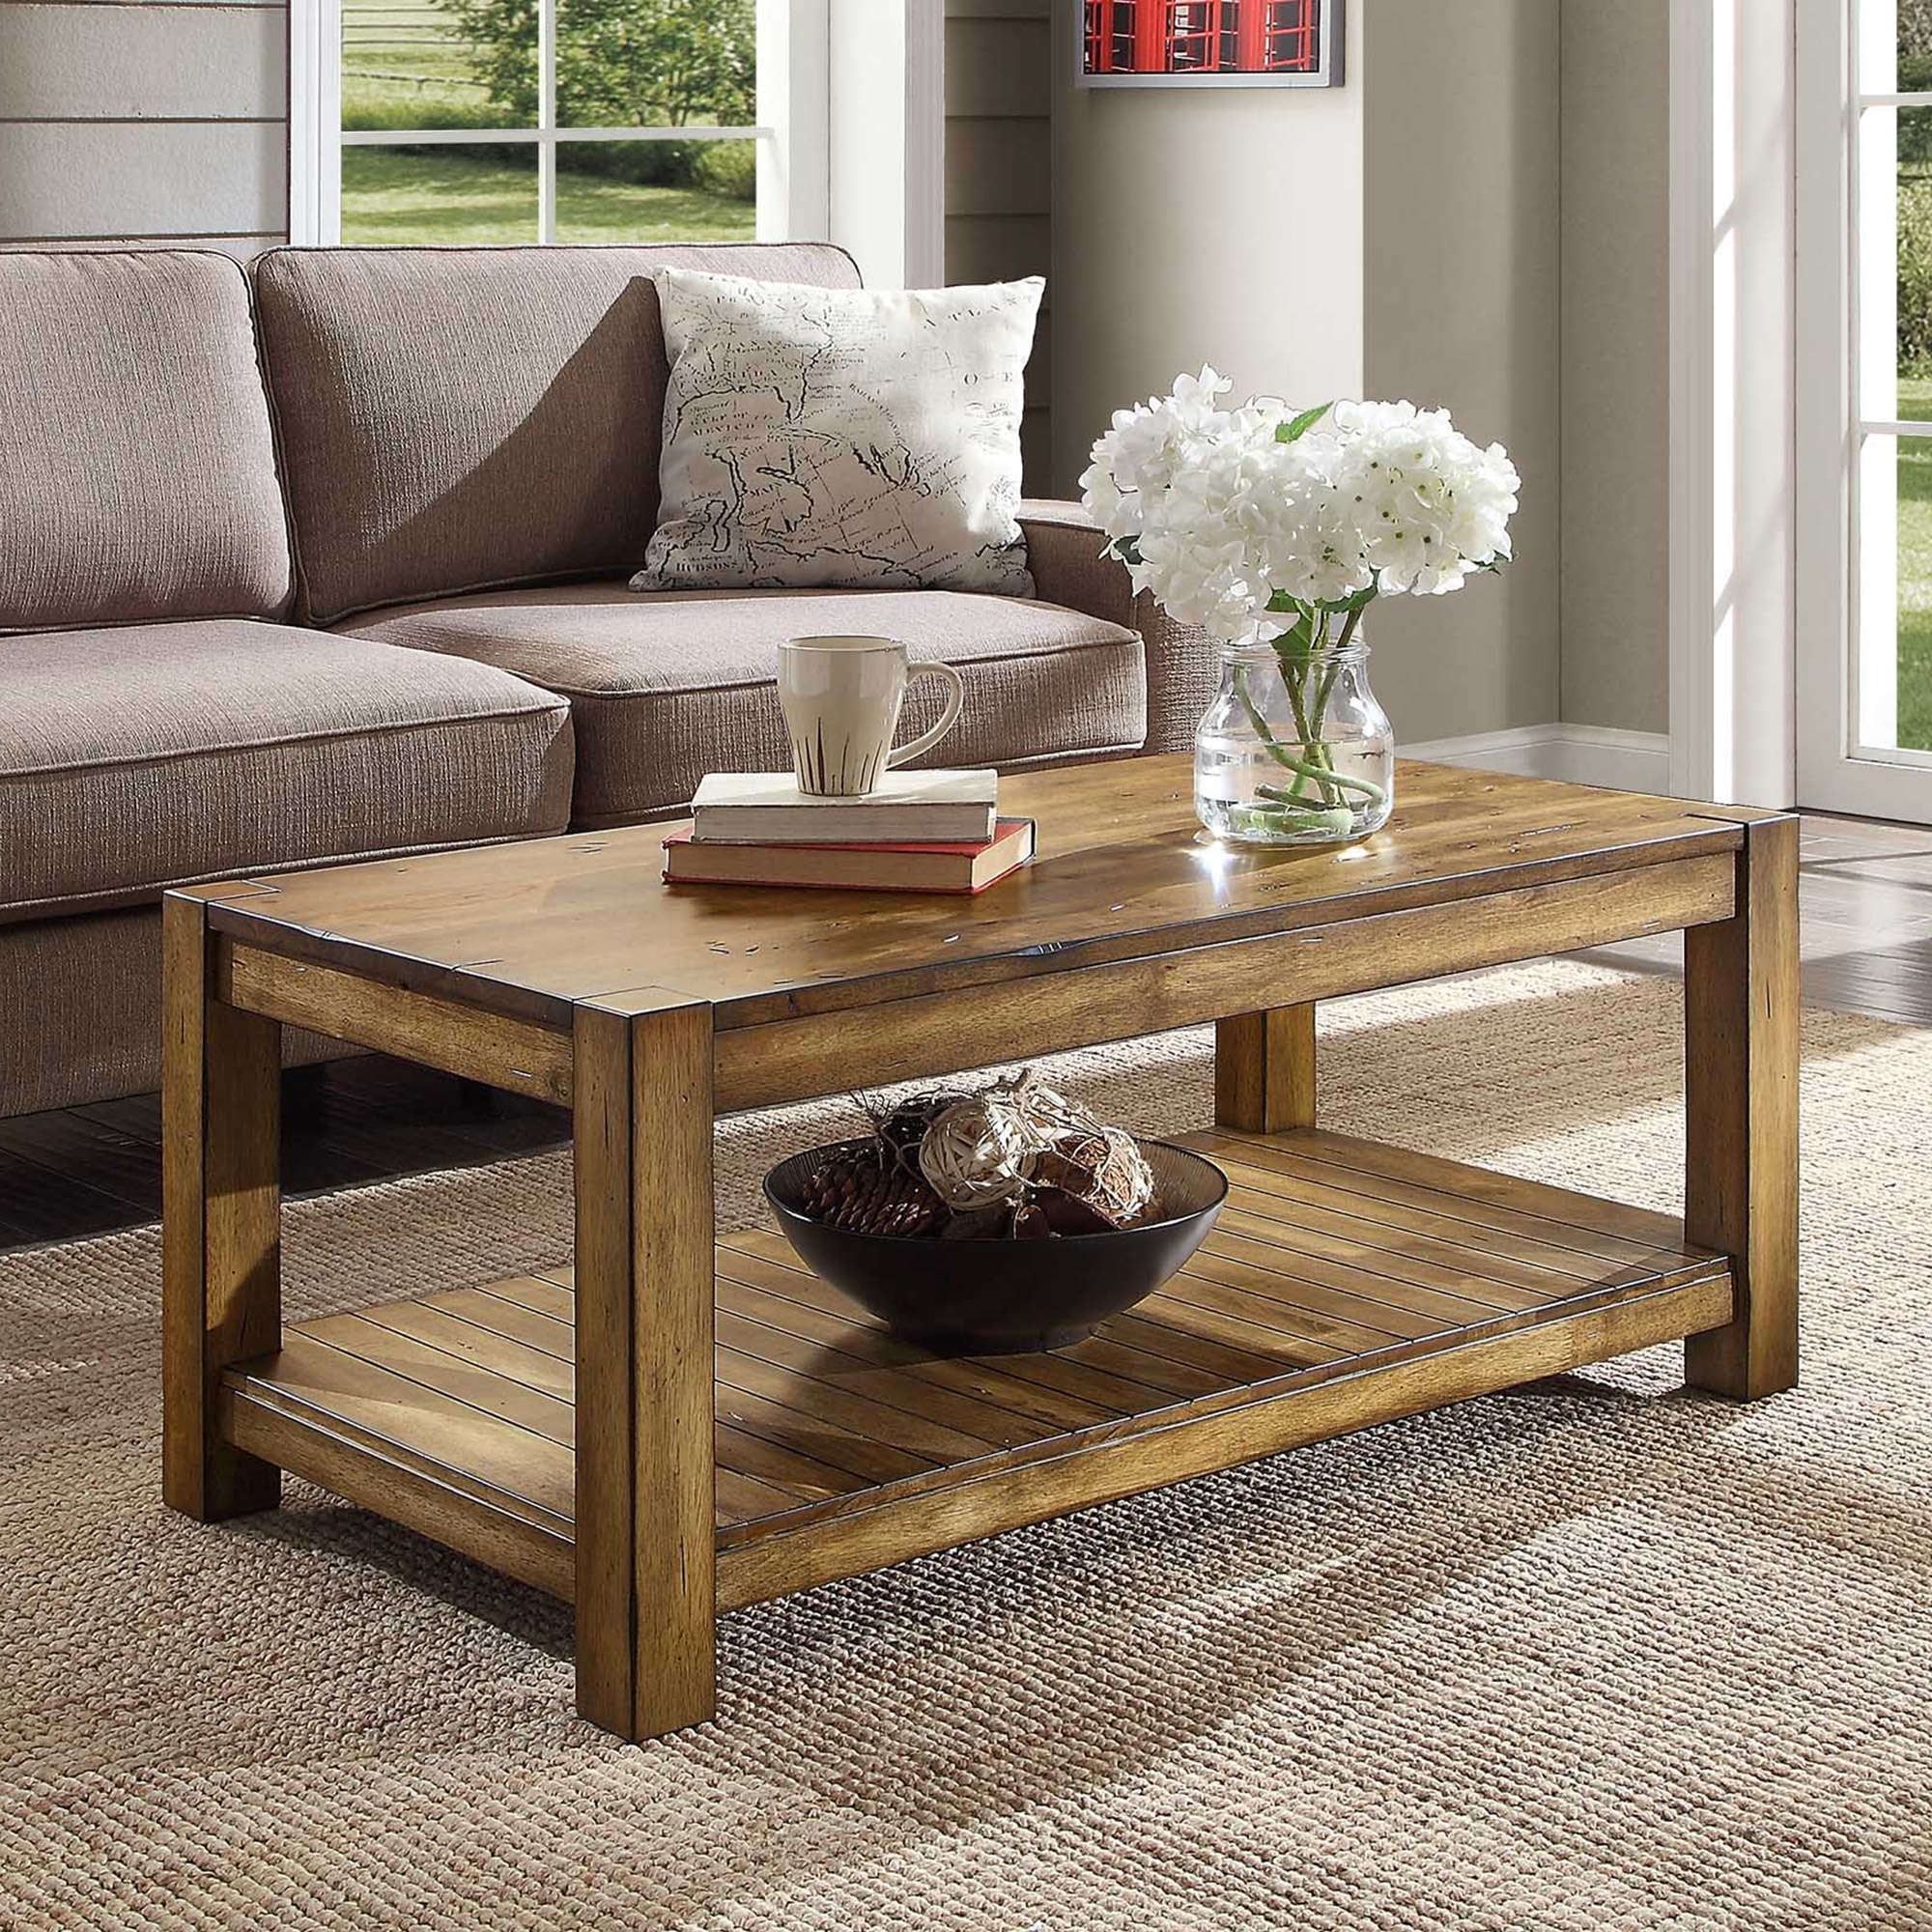 Bryant Solid Wood Coffee Table, Rustic Maple Brown Finish – Walmart Throughout Pemberly Row Replicated Wood Coffee Tables (Gallery 6 of 20)